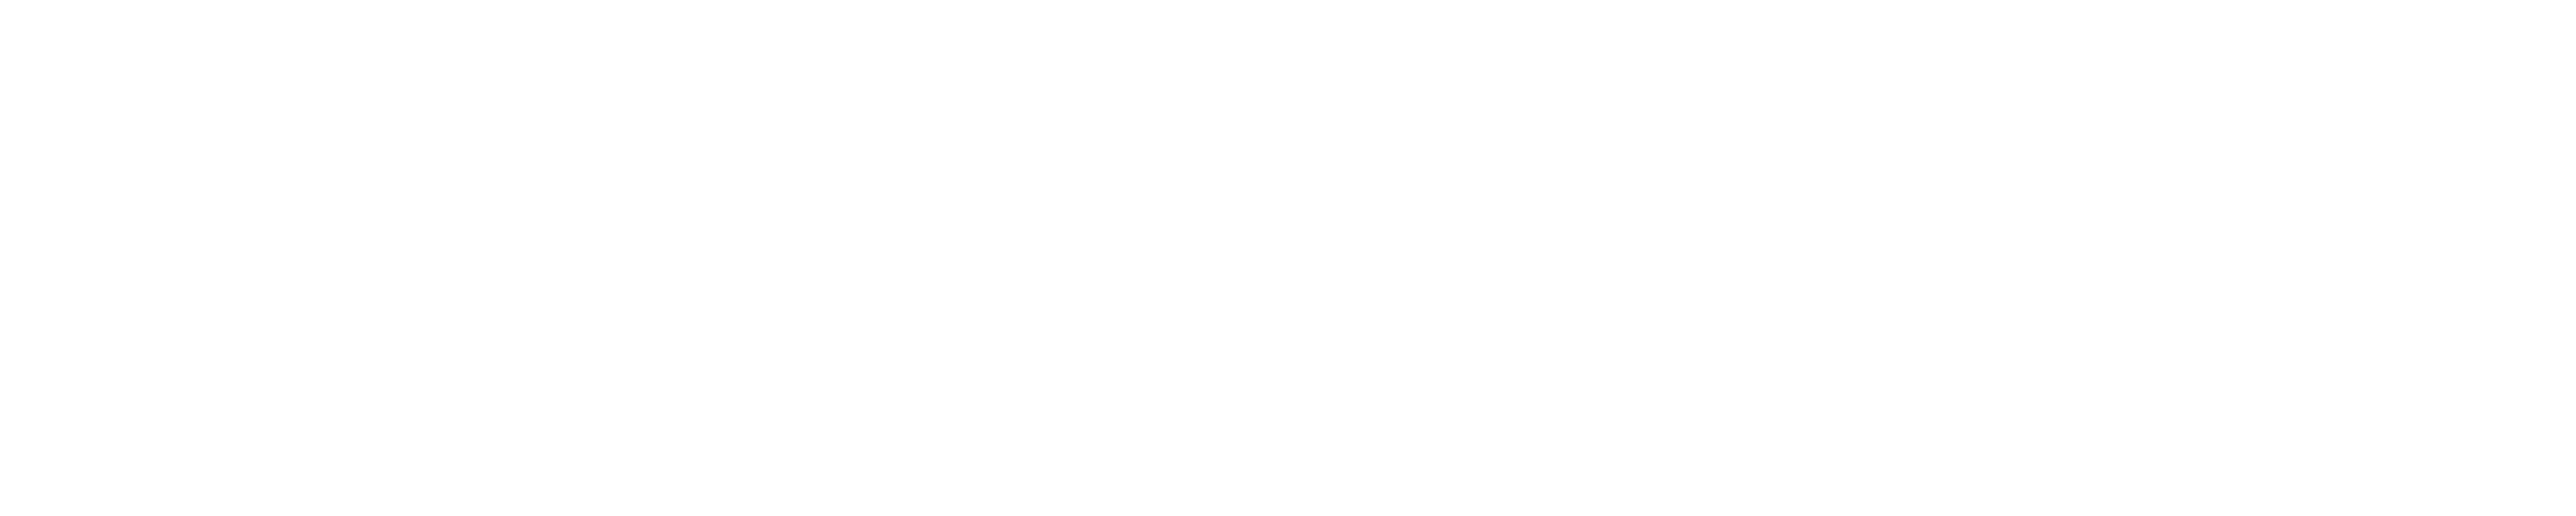 Home - Wollondilly Shire Council logo